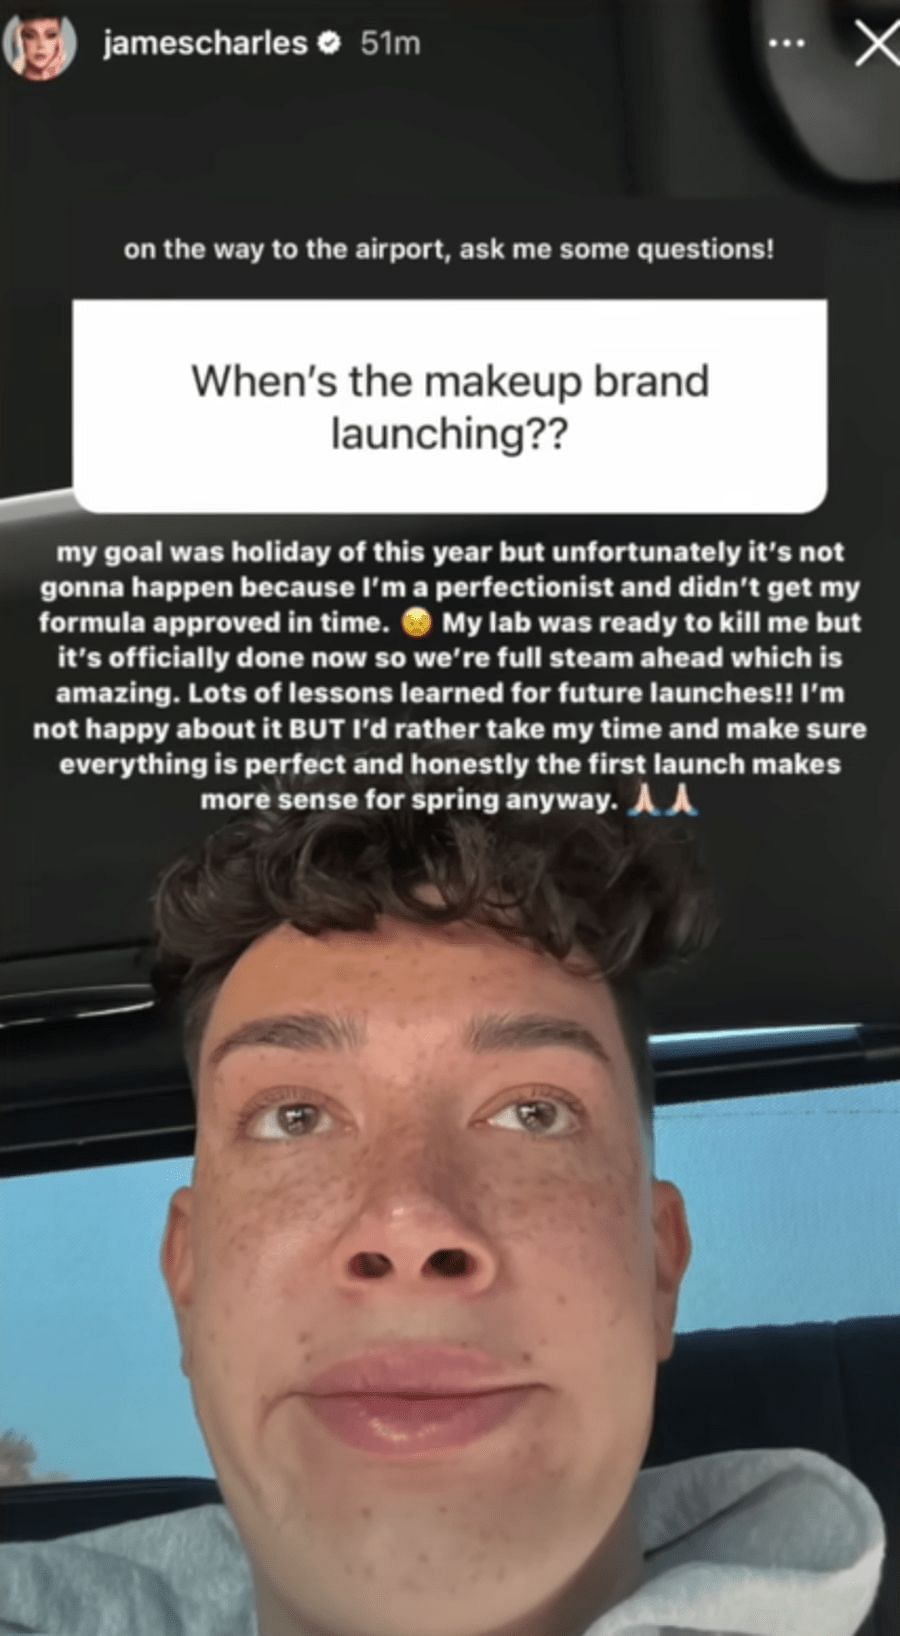 James Charles reveals that his brand will be launching in the spring (Image via jamescharles/Instagram)